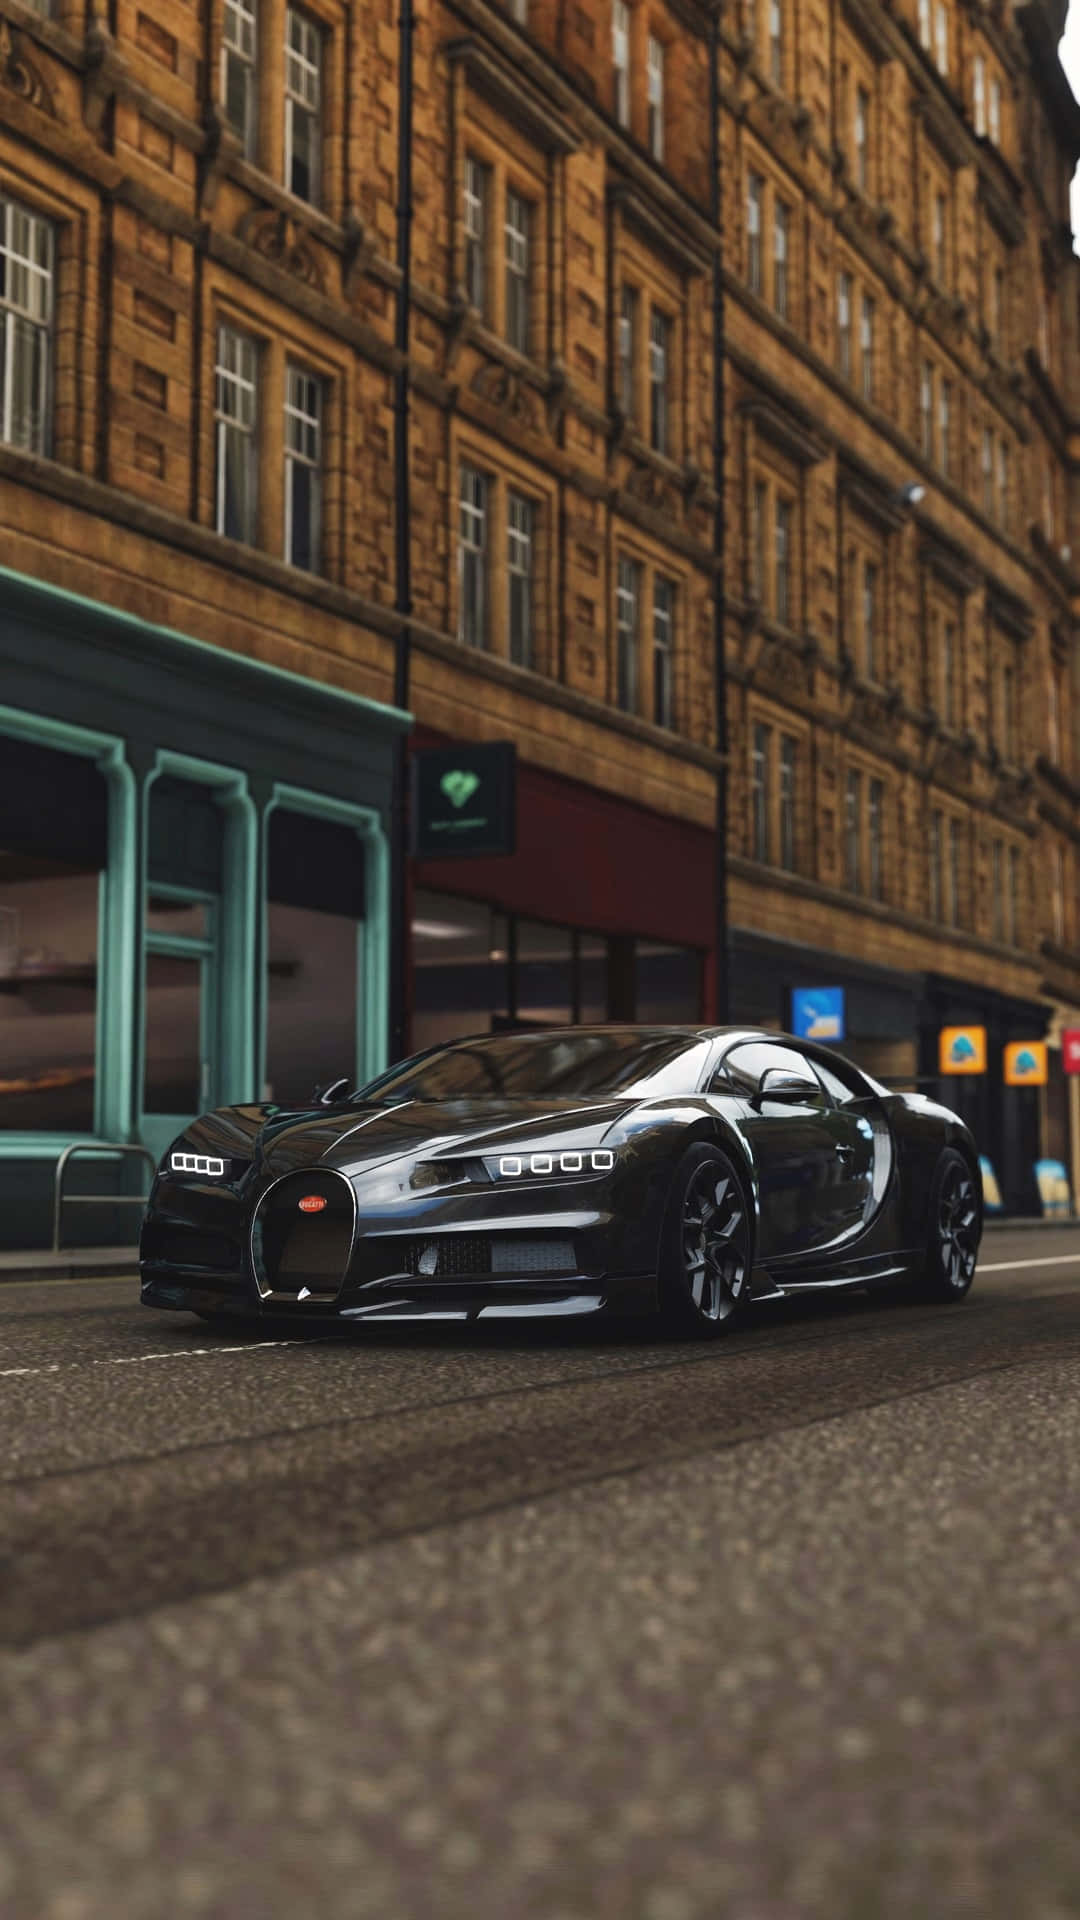 Experience the pinnacle of luxury with the Bugatti Phone Wallpaper